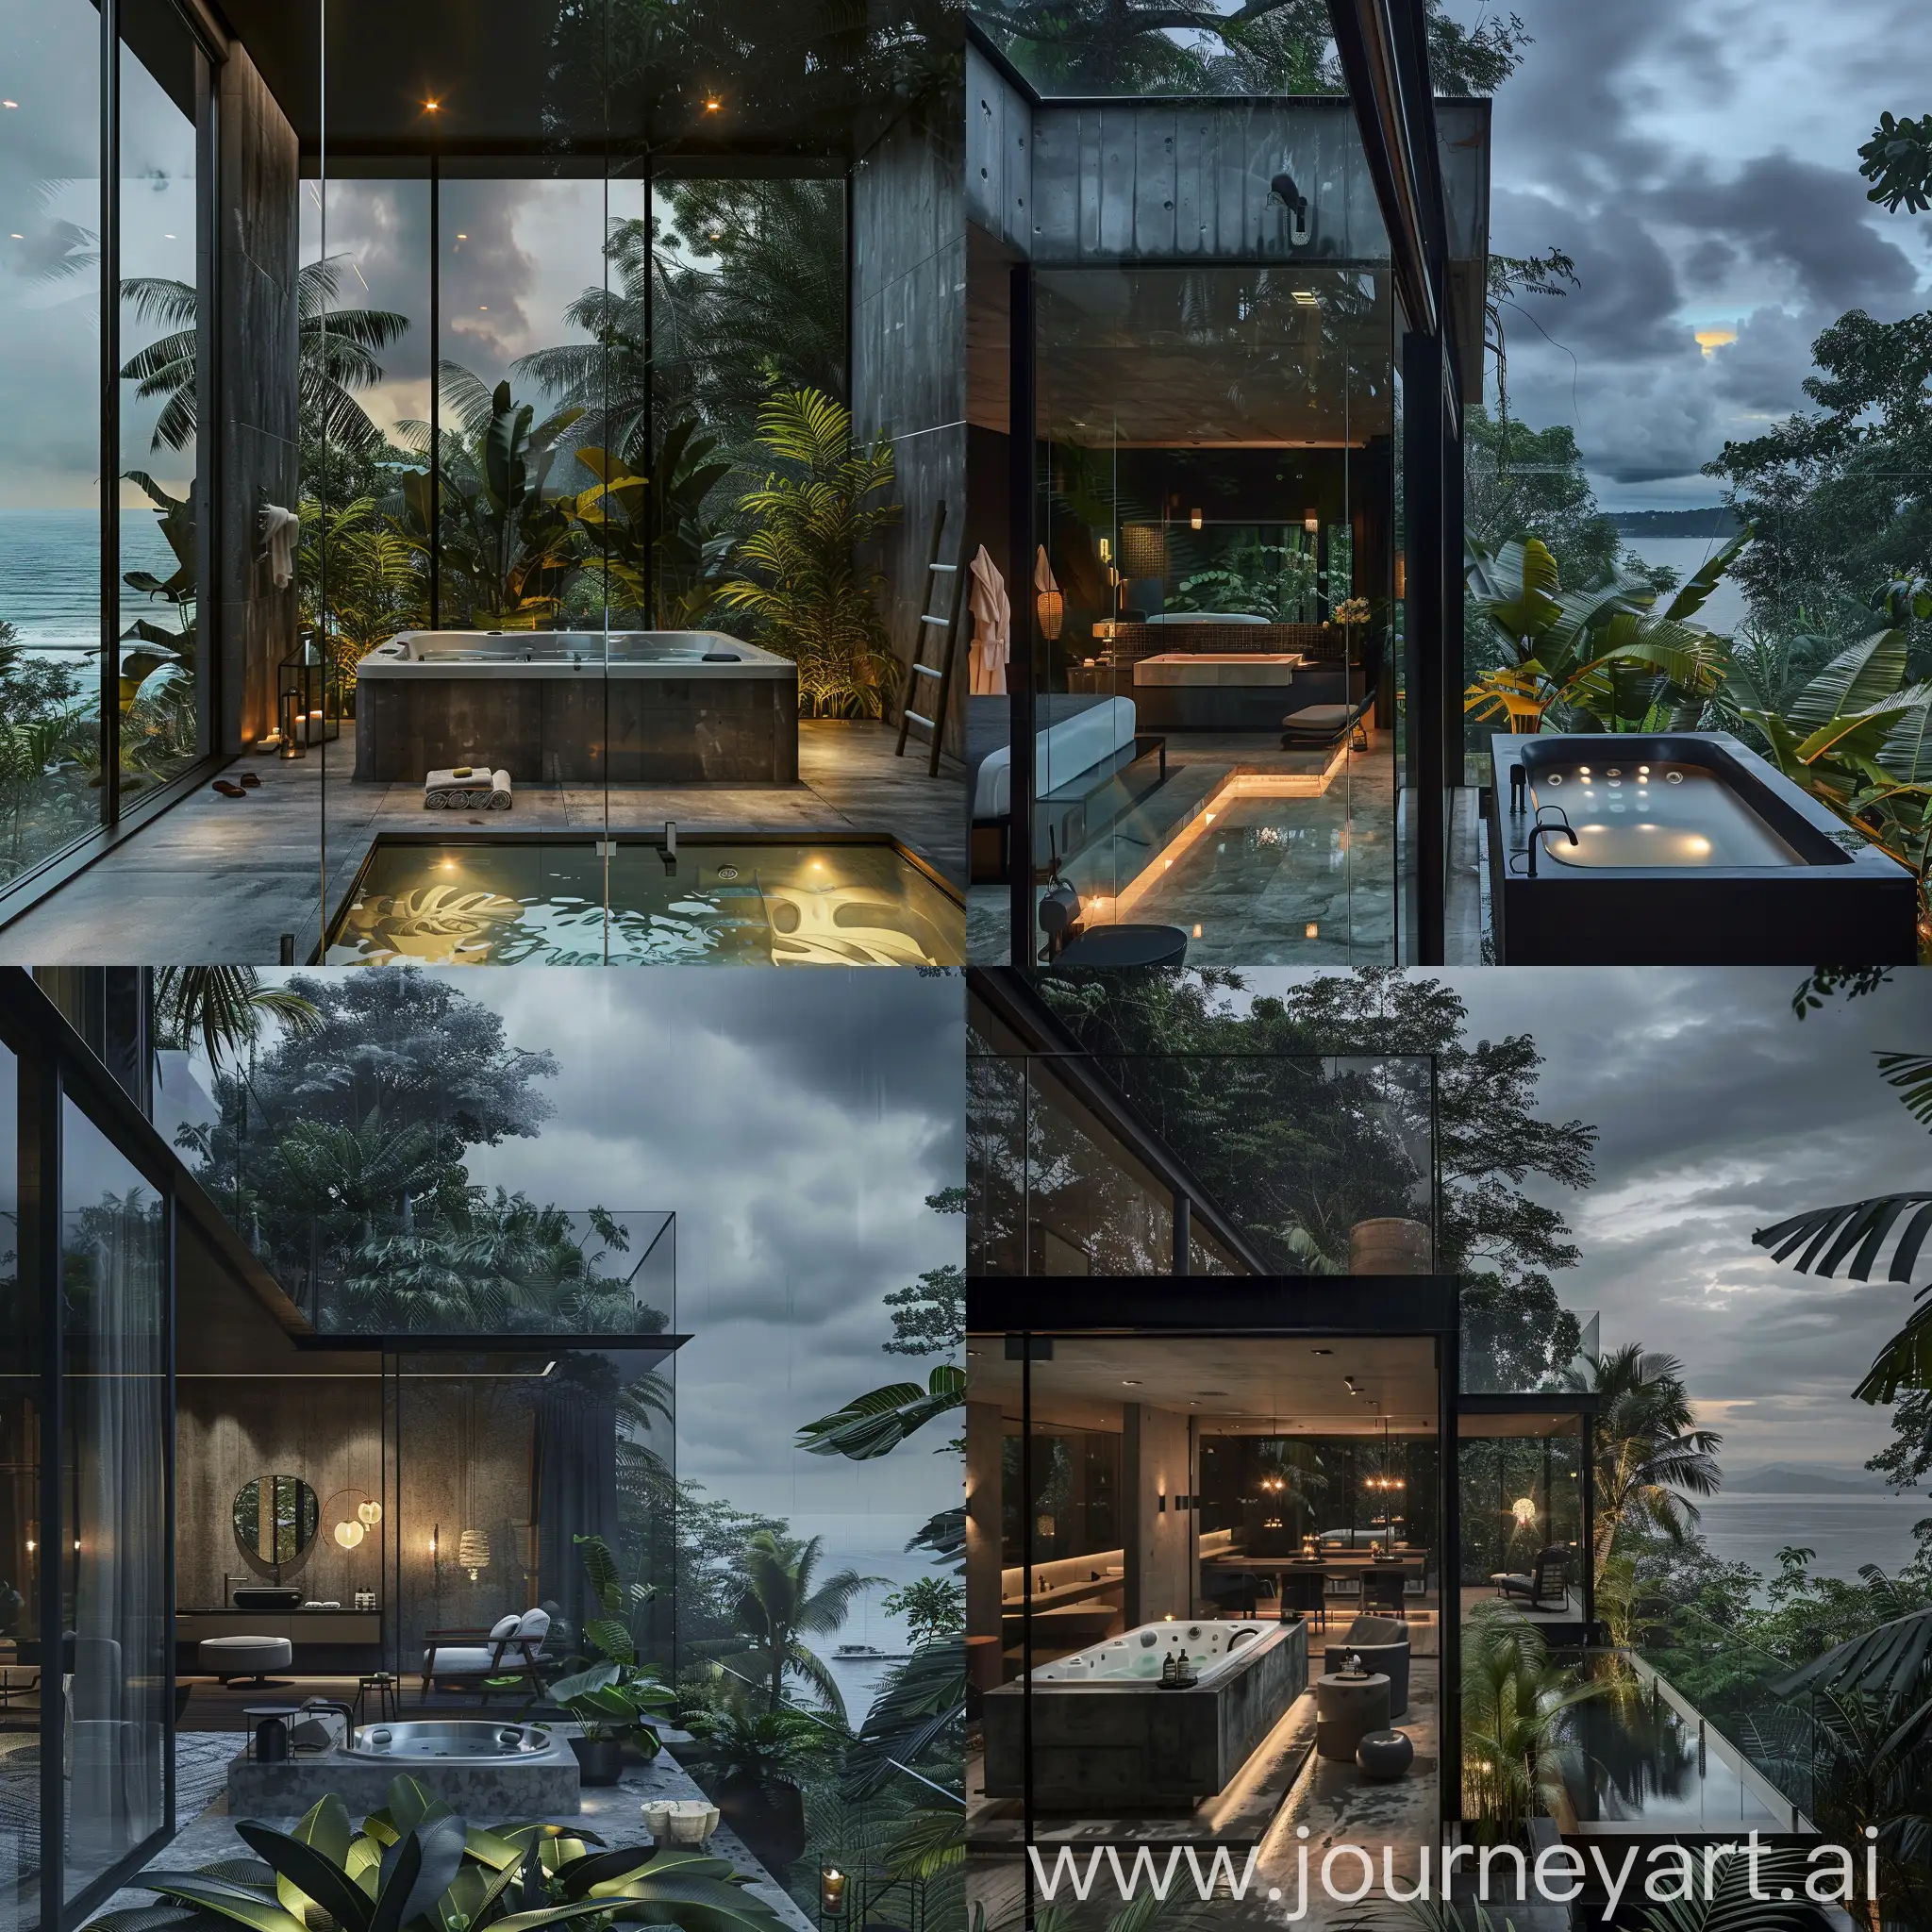 A modern glass bathroom with black, gray and concrete colors and a hot tub with a complete arrangement of furniture, decorated and soft lighting, a tall window wall, In lush tropical forest with broad leaf trees and sea, heavy cloudy sky at night, real photo.